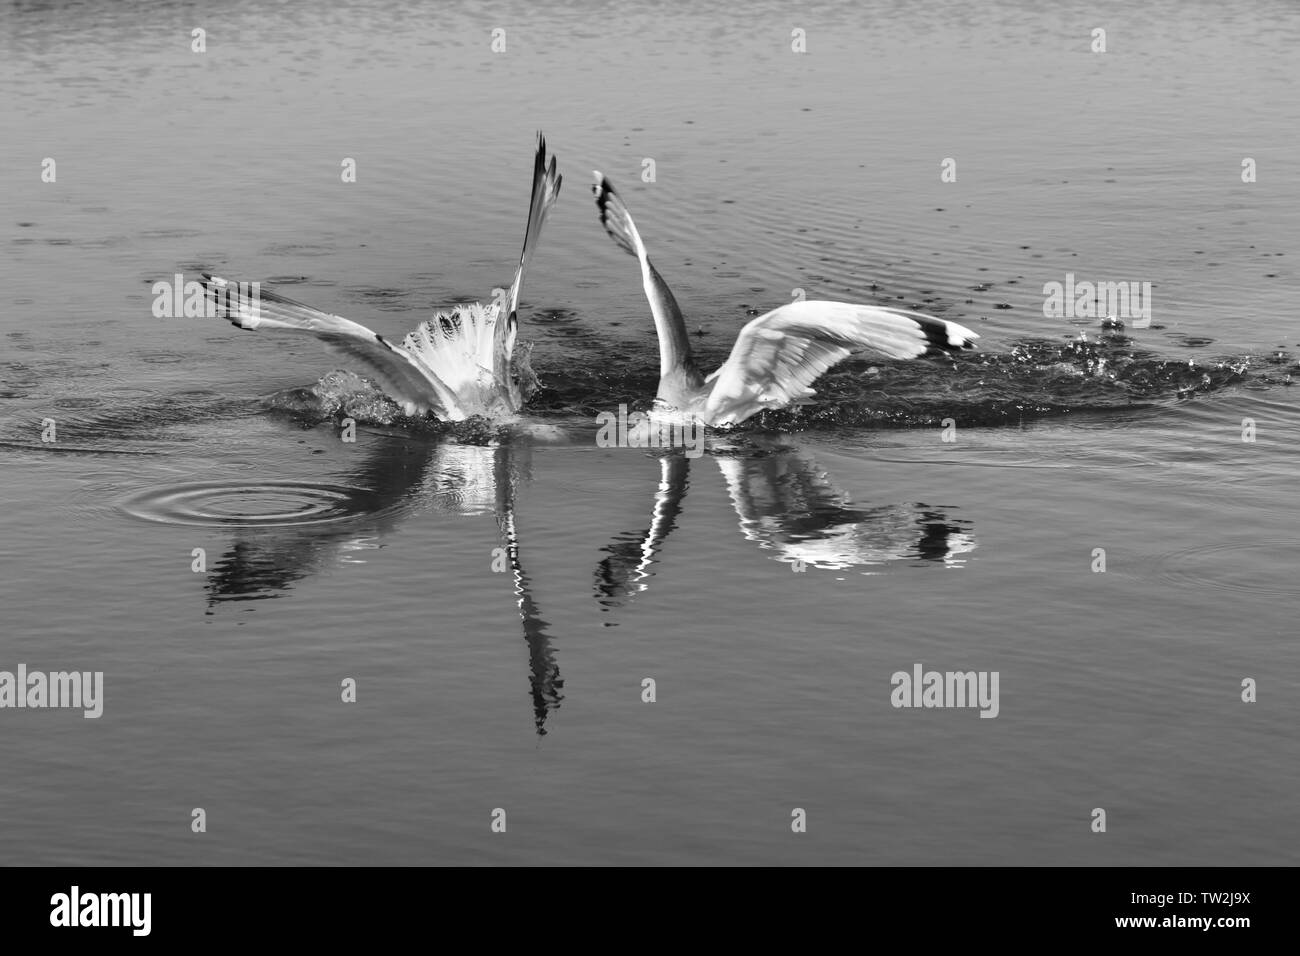 Two seagulls fighting for fish with head underwater at sunny summer day. Black and white toned image. Stock Photo